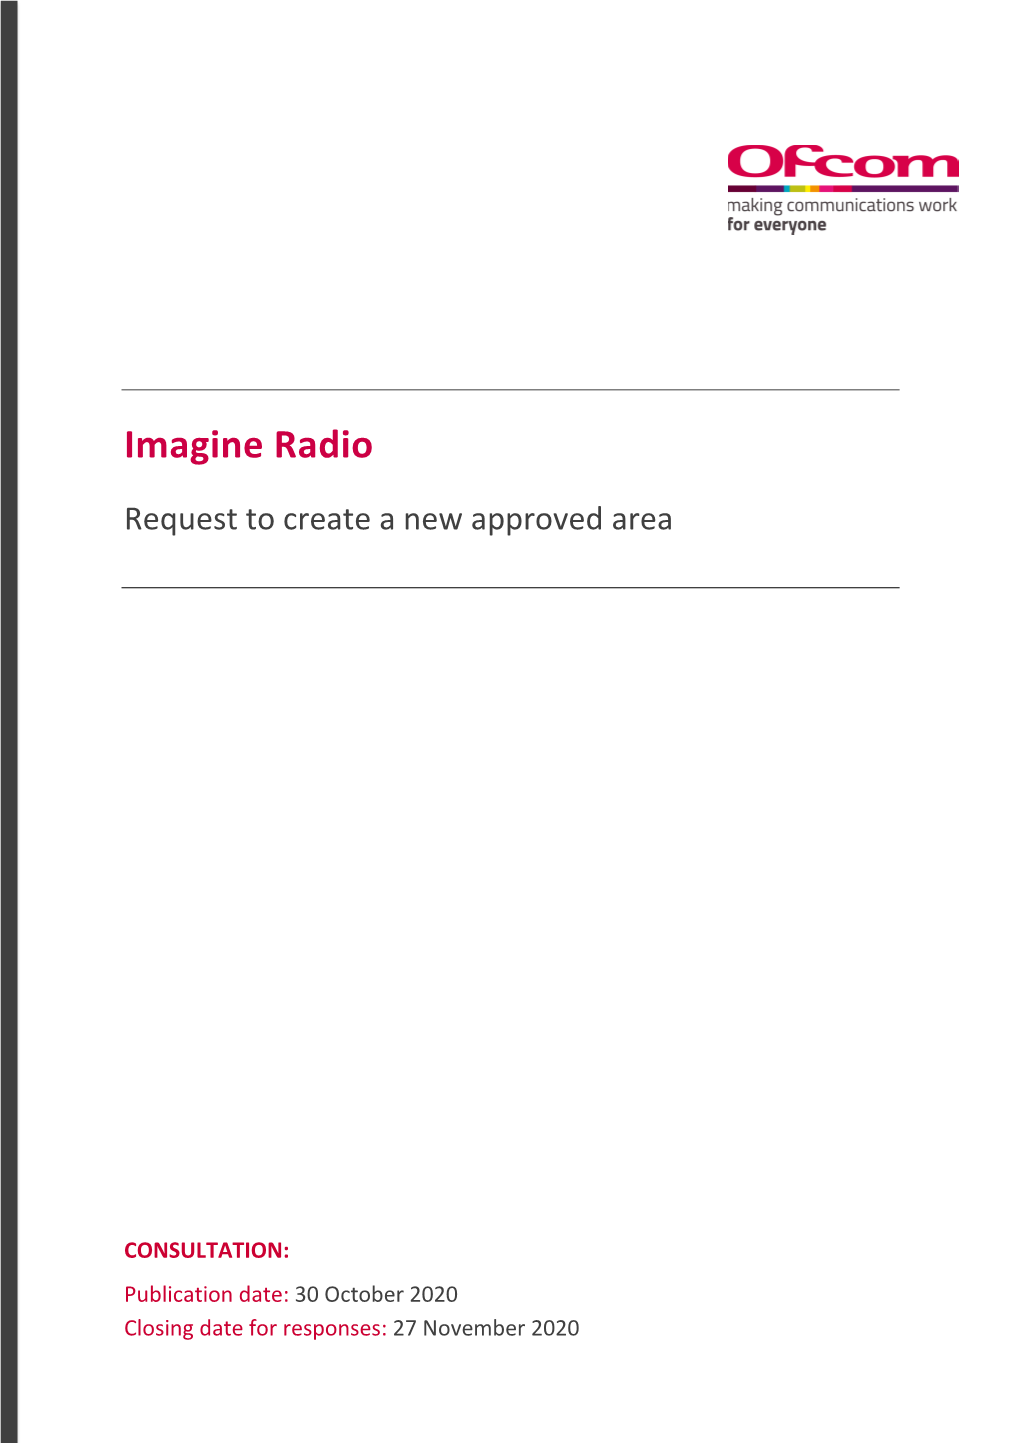 Imagine Radio Request to Create a New Approved Area